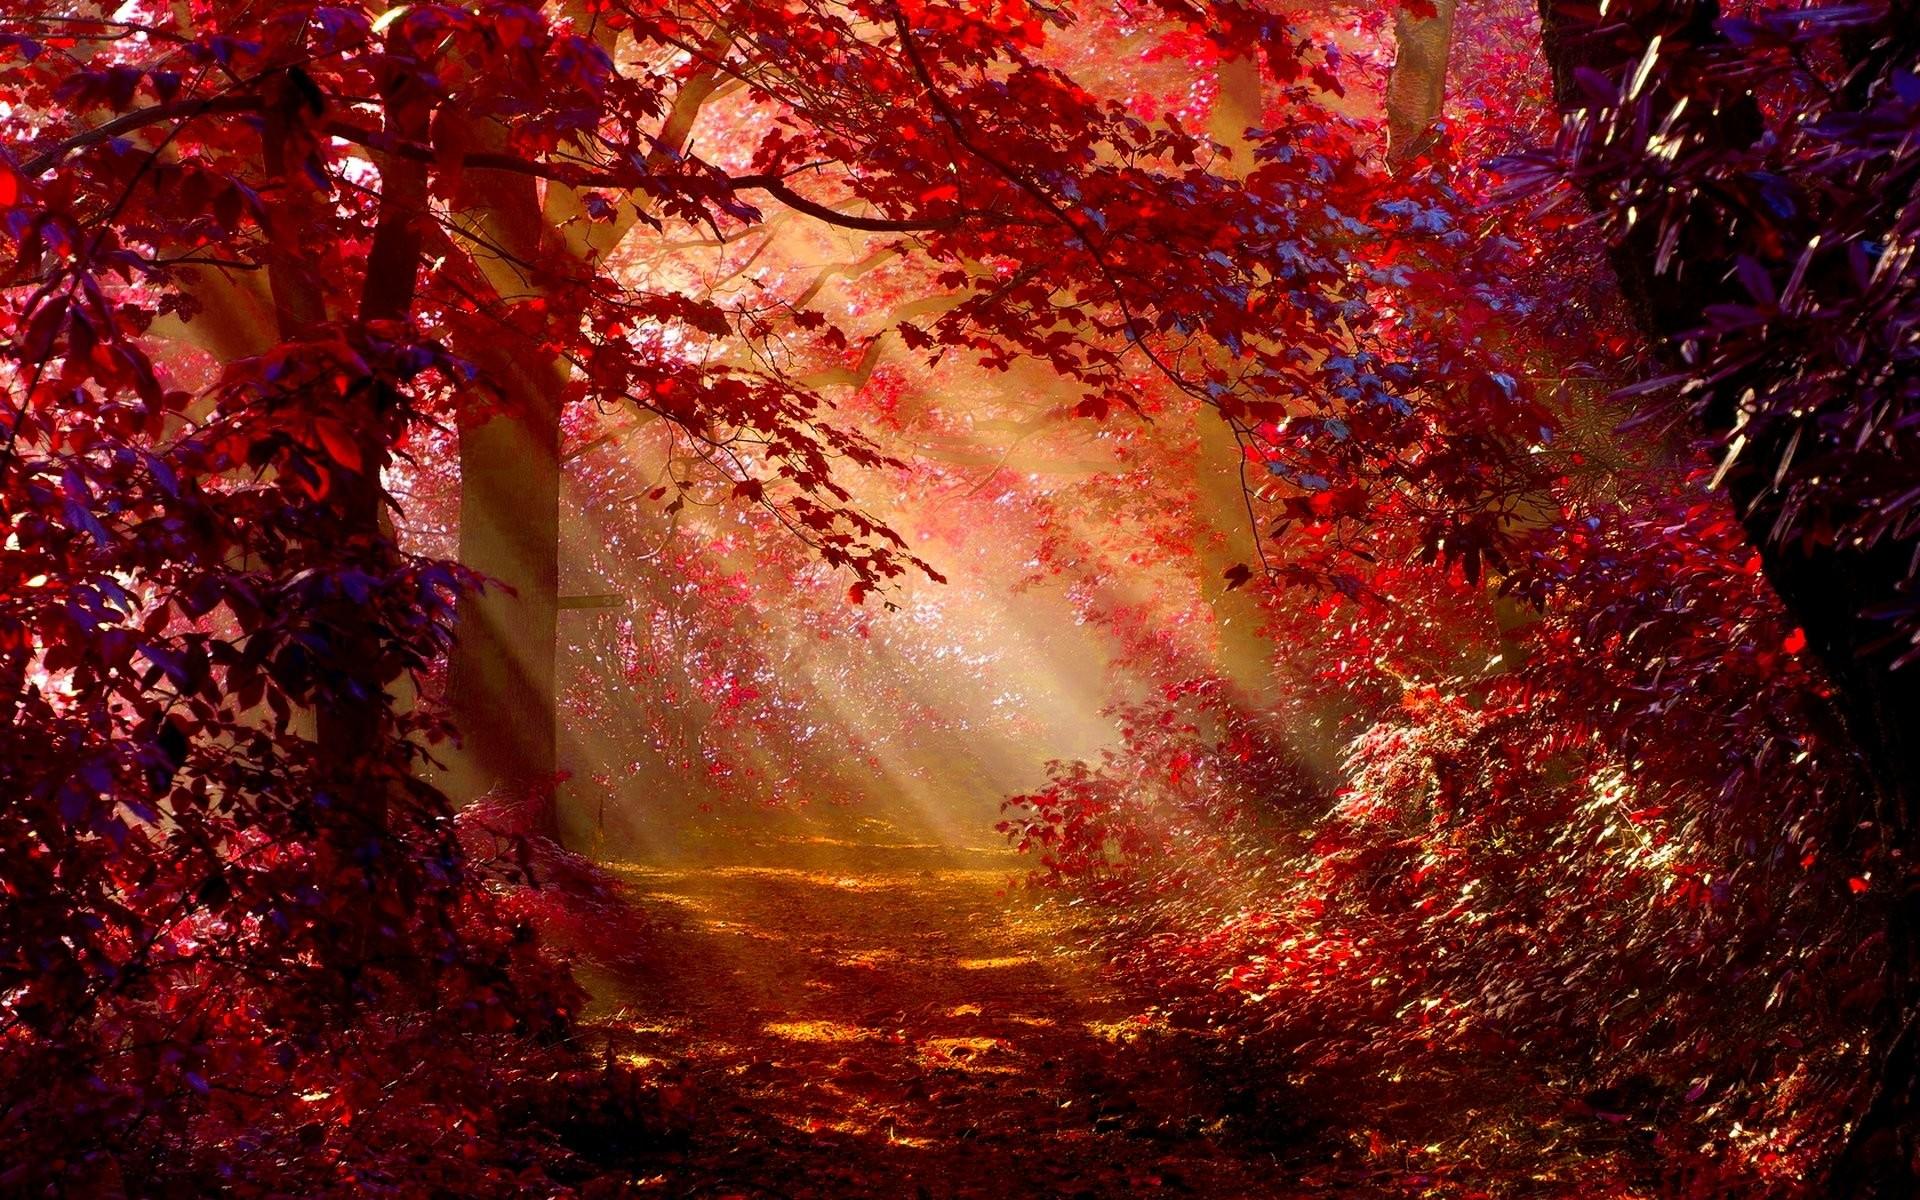 Download wallpaper 1920x1080 red forest tree stream nature full hd  hdtv fhd 1080p wallpaper 1920x1080 hd background 23340